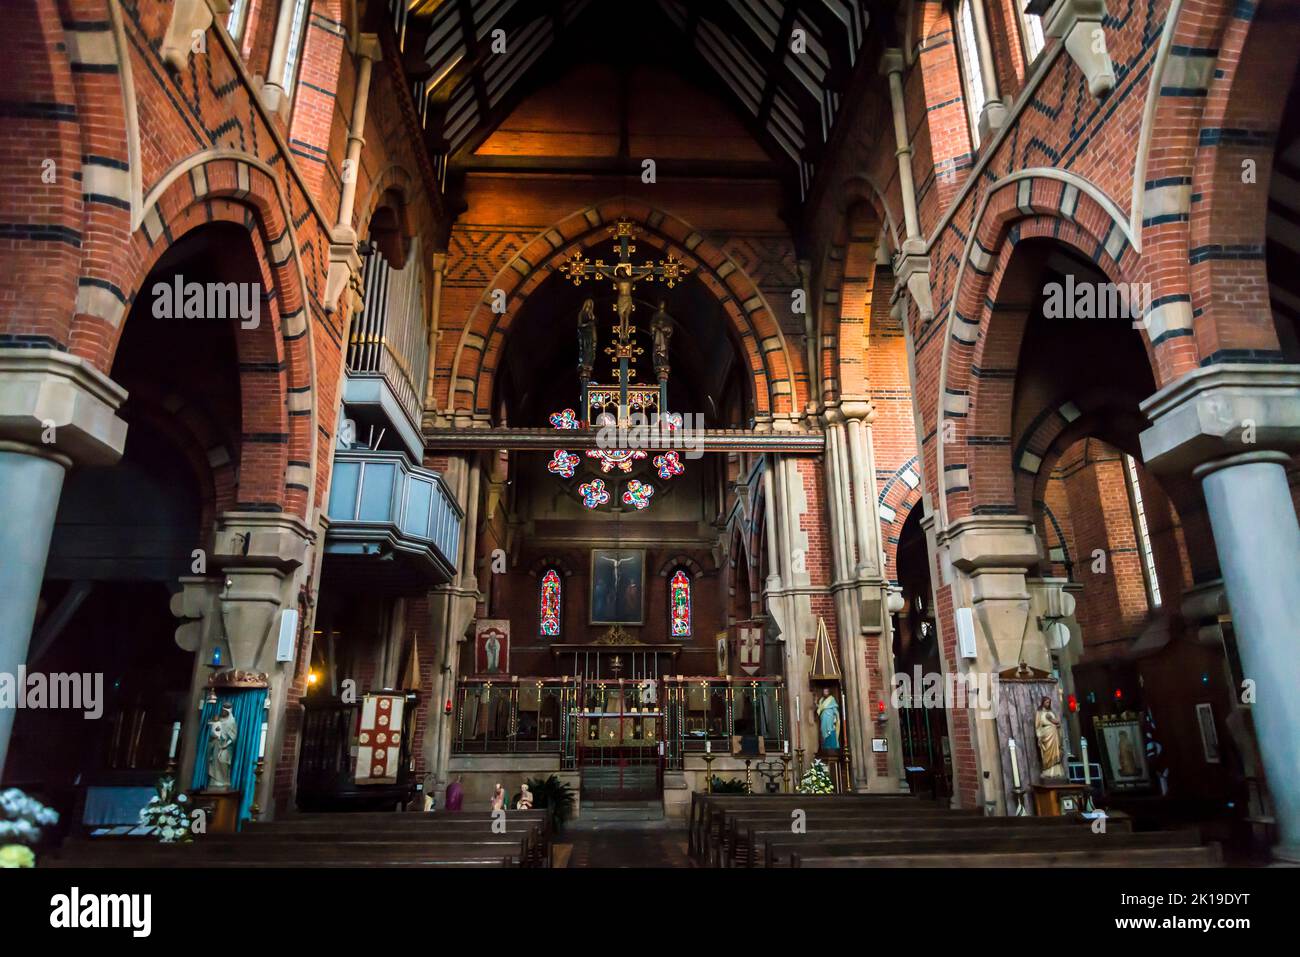 St Peter's, London Docks, a Grade I listed Anglican church in Wapping, built in mid 19th century in Neo-Gothic style, Tower Hamlets, London, UK Stock Photo